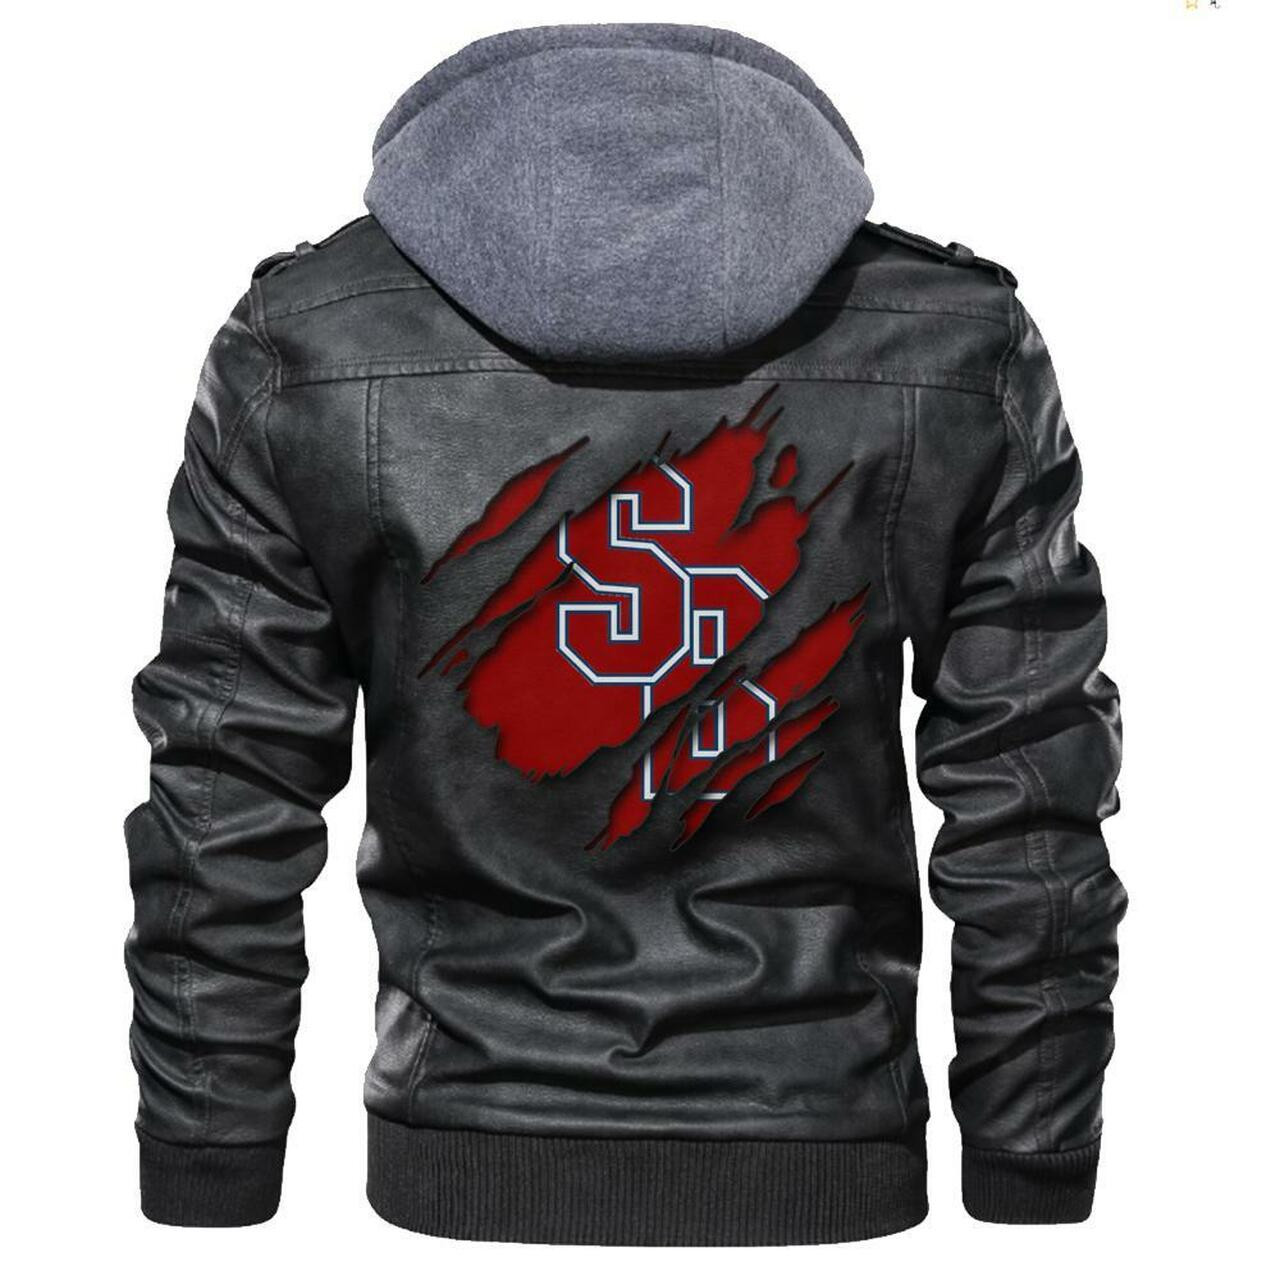 You can find Leather Jacket online at a great price 176